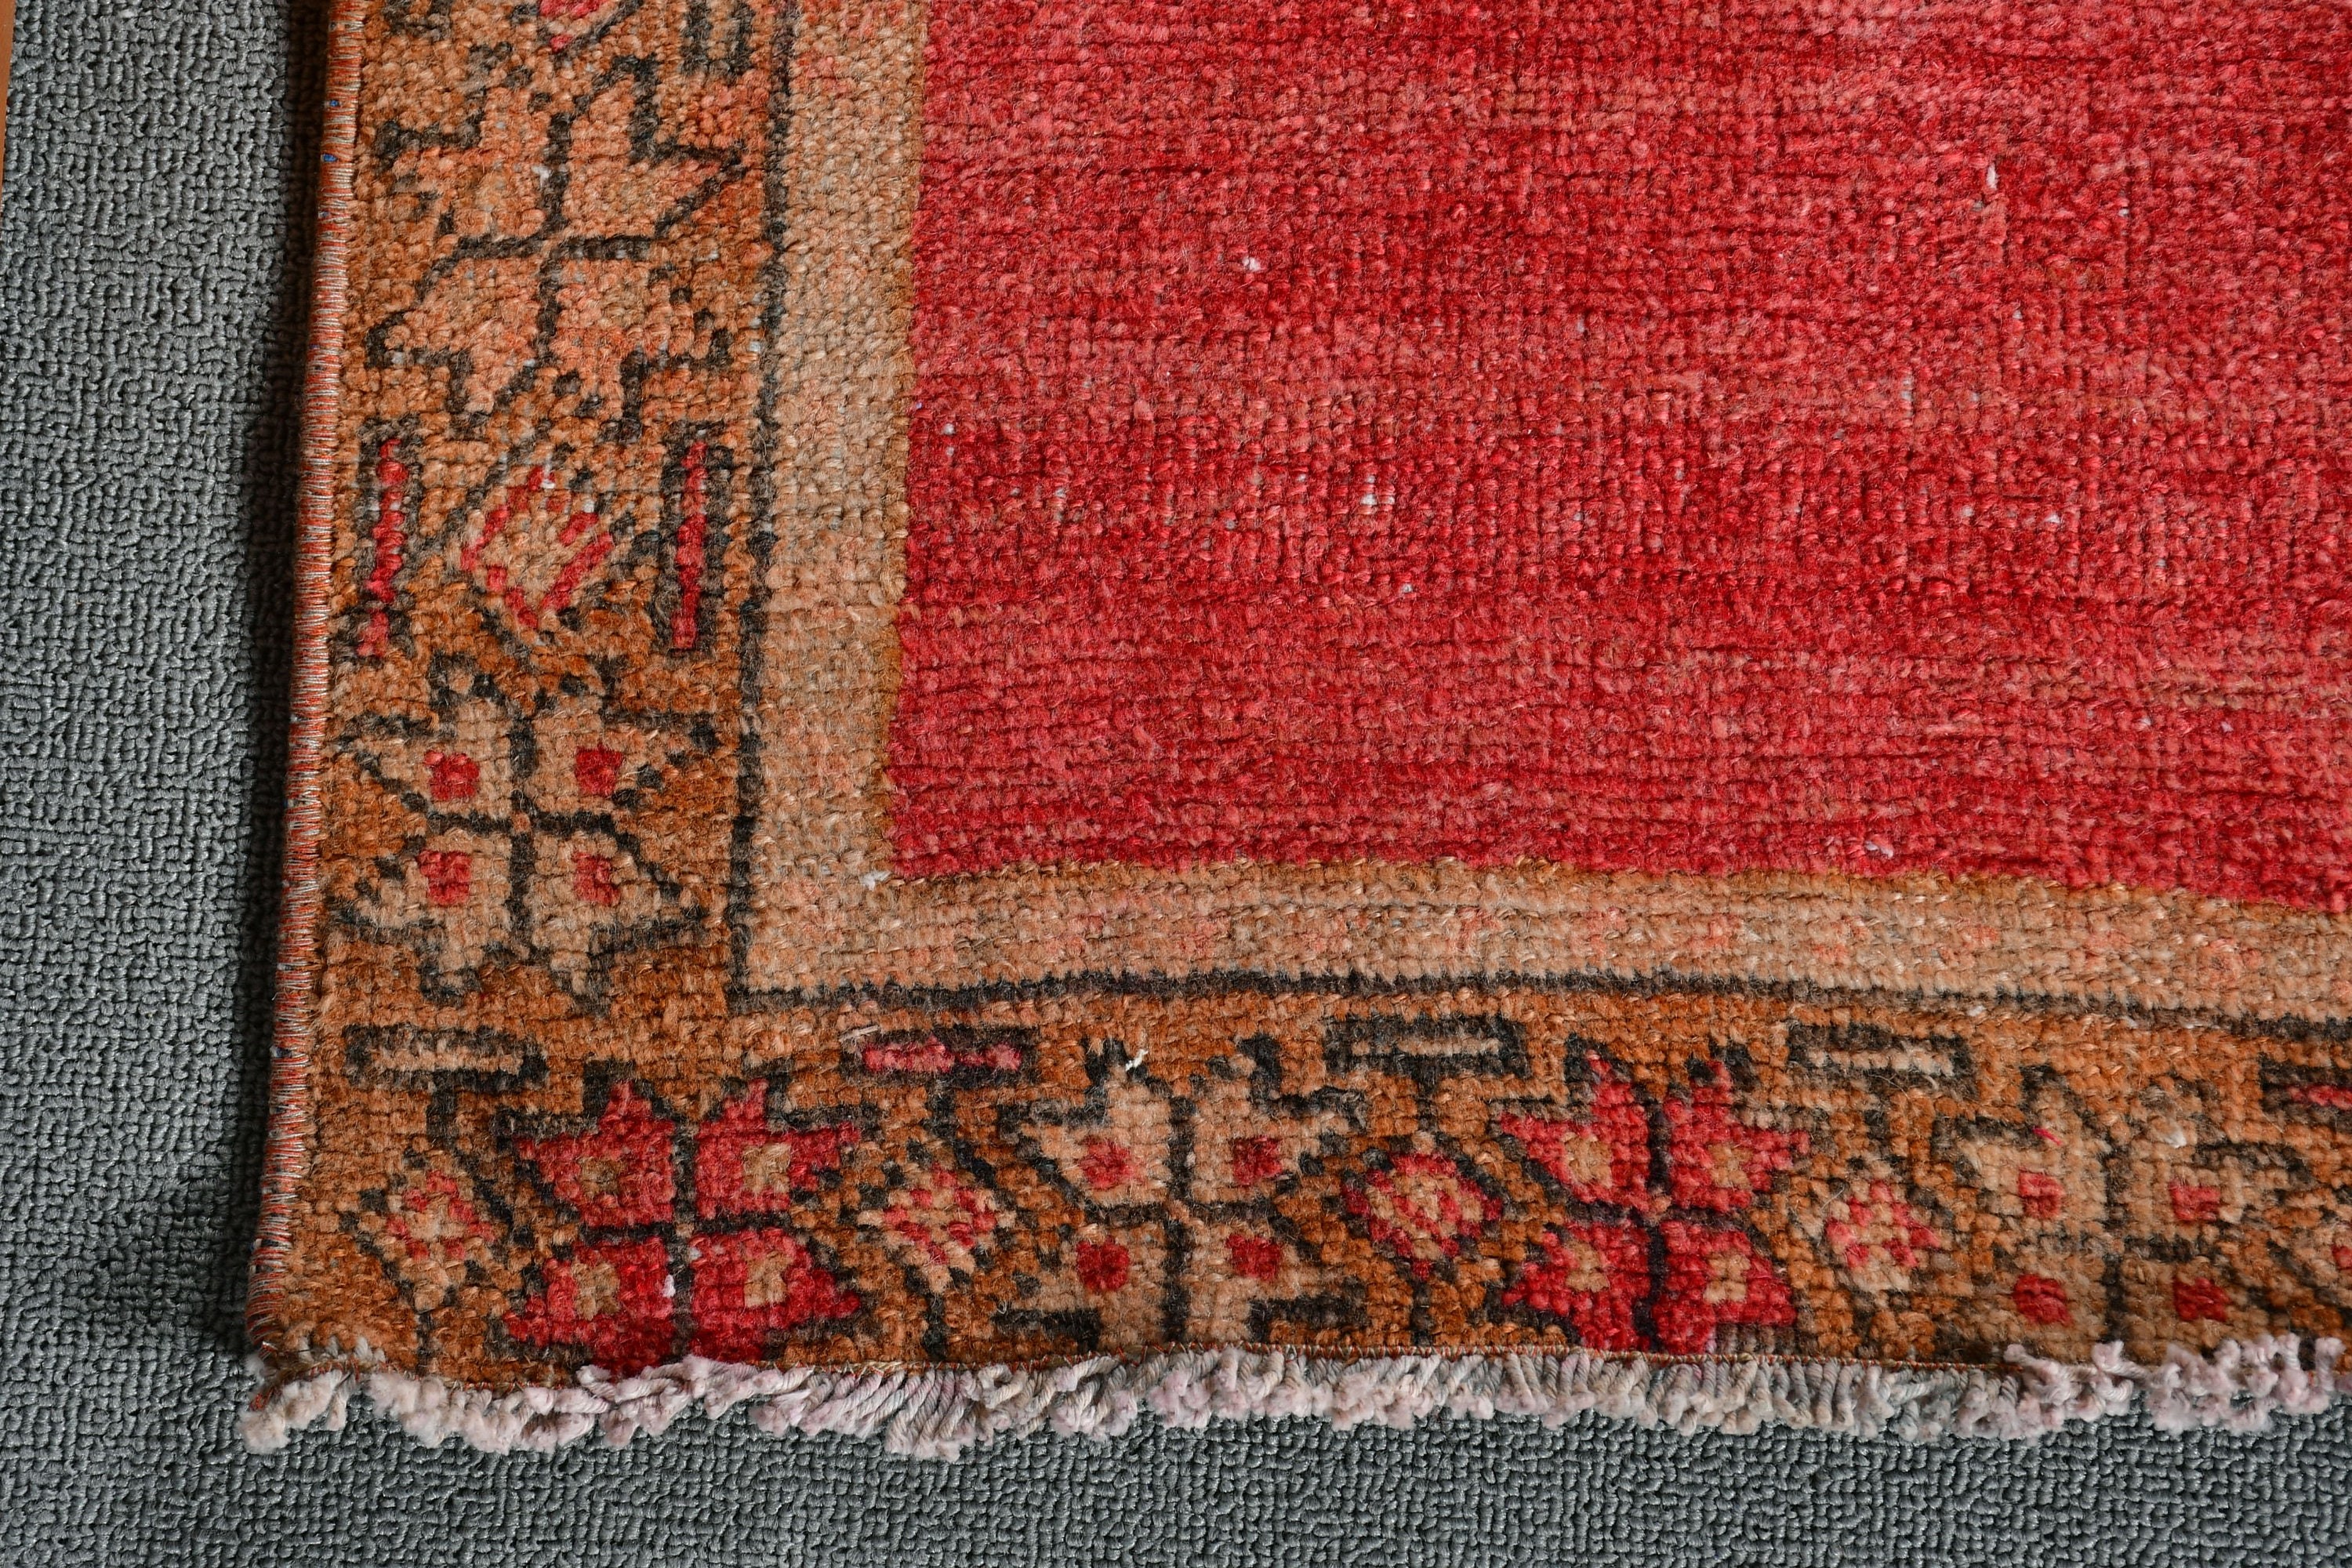 Rugs for Bath, Moroccan Rug, 1.9x4.1 ft Small Rugs, Vintage Rug, Abstract Rugs, Car Mat Rug, Turkish Rug, Door Mat Rug, Antique Rugs